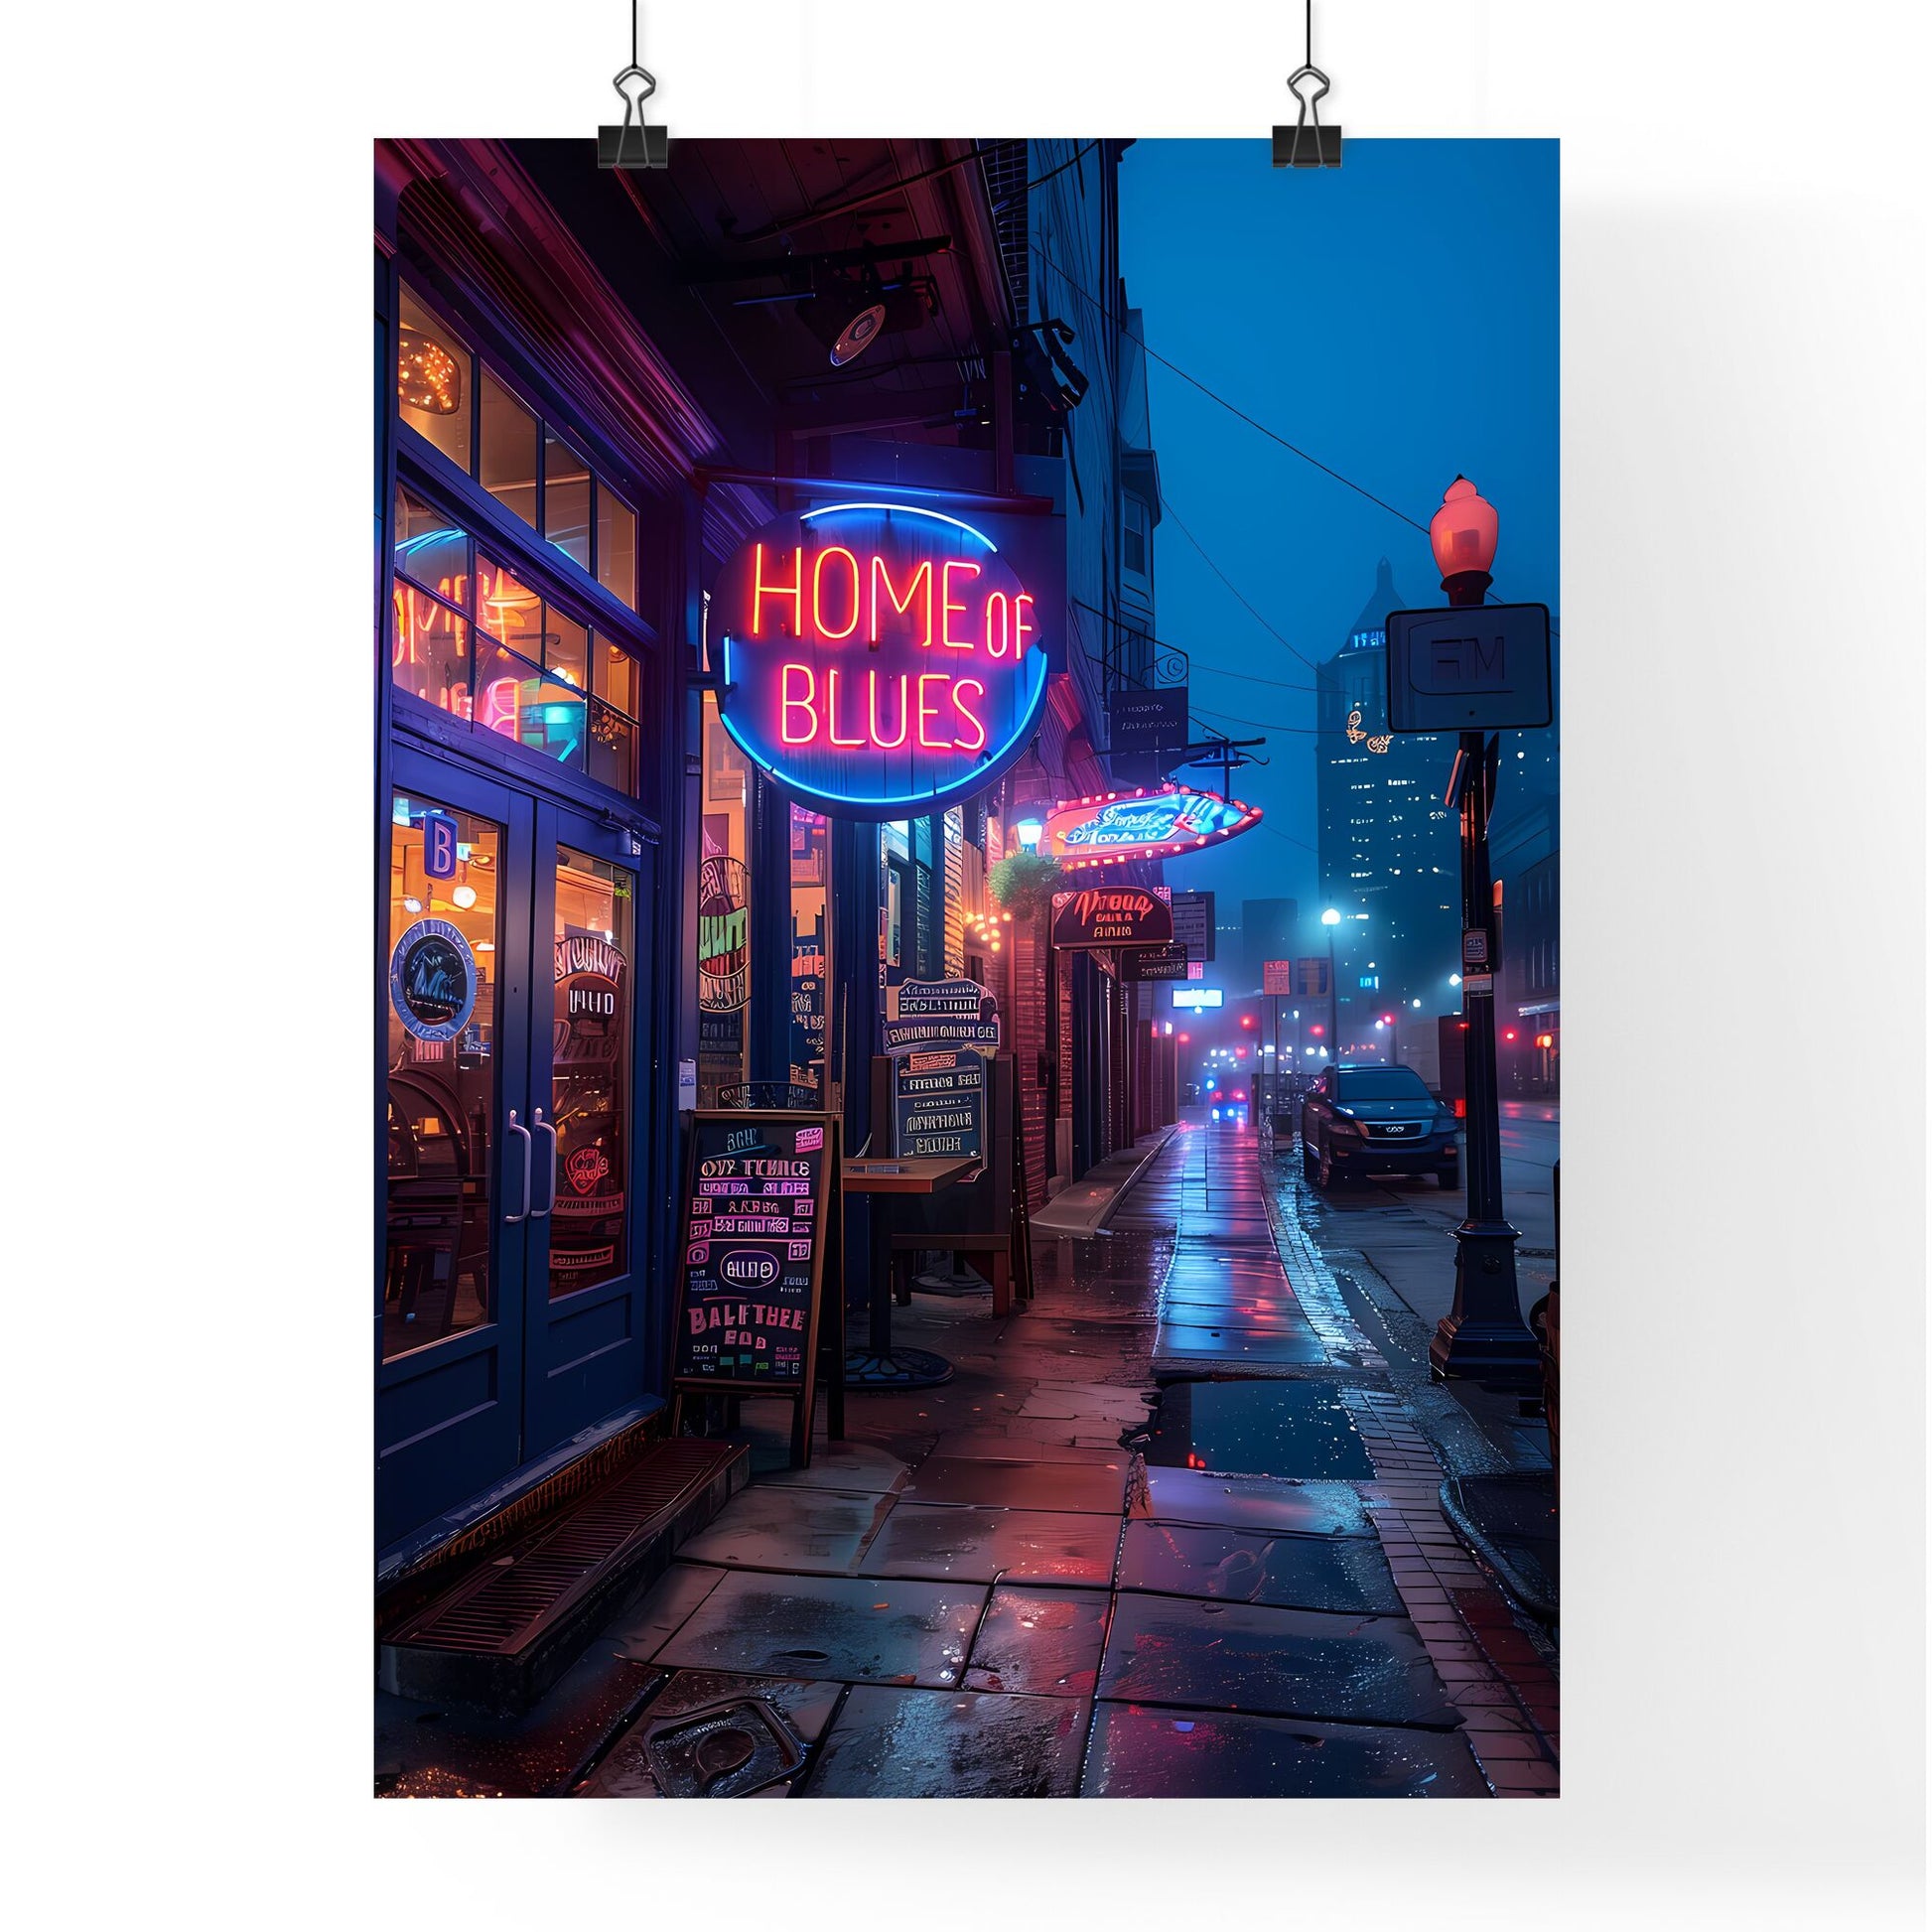 Neon Sign Home of the Blues Featuring Weathered Screen Print, Beale Street at Night, Vibrant and Artistic Representation Default Title